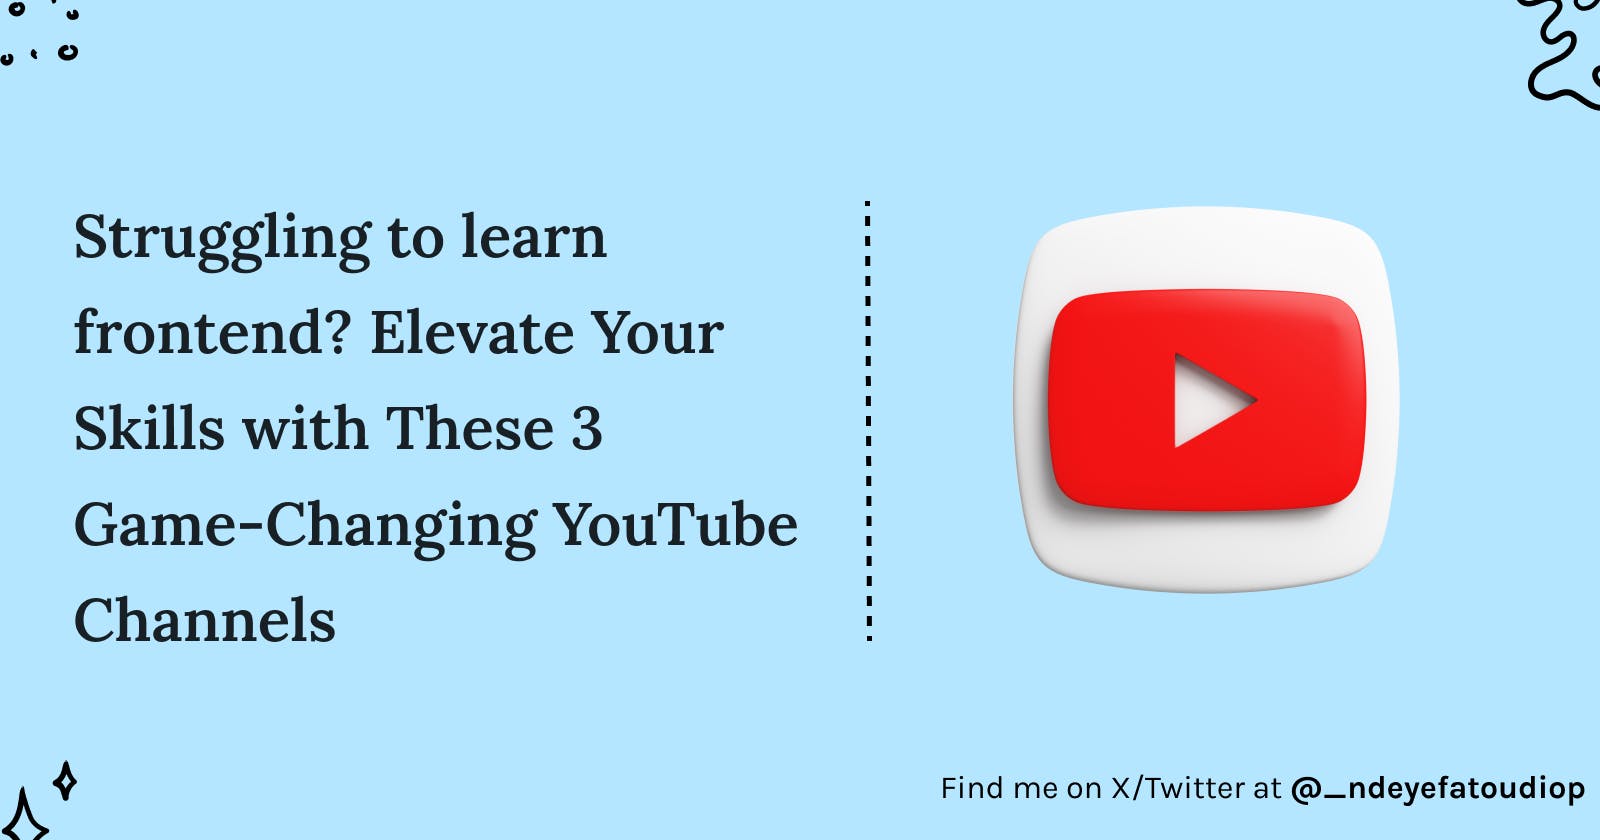 Struggling to learn frontend? Elevate Your Skills with These 3 Game-Changing YouTube Channels 🚀